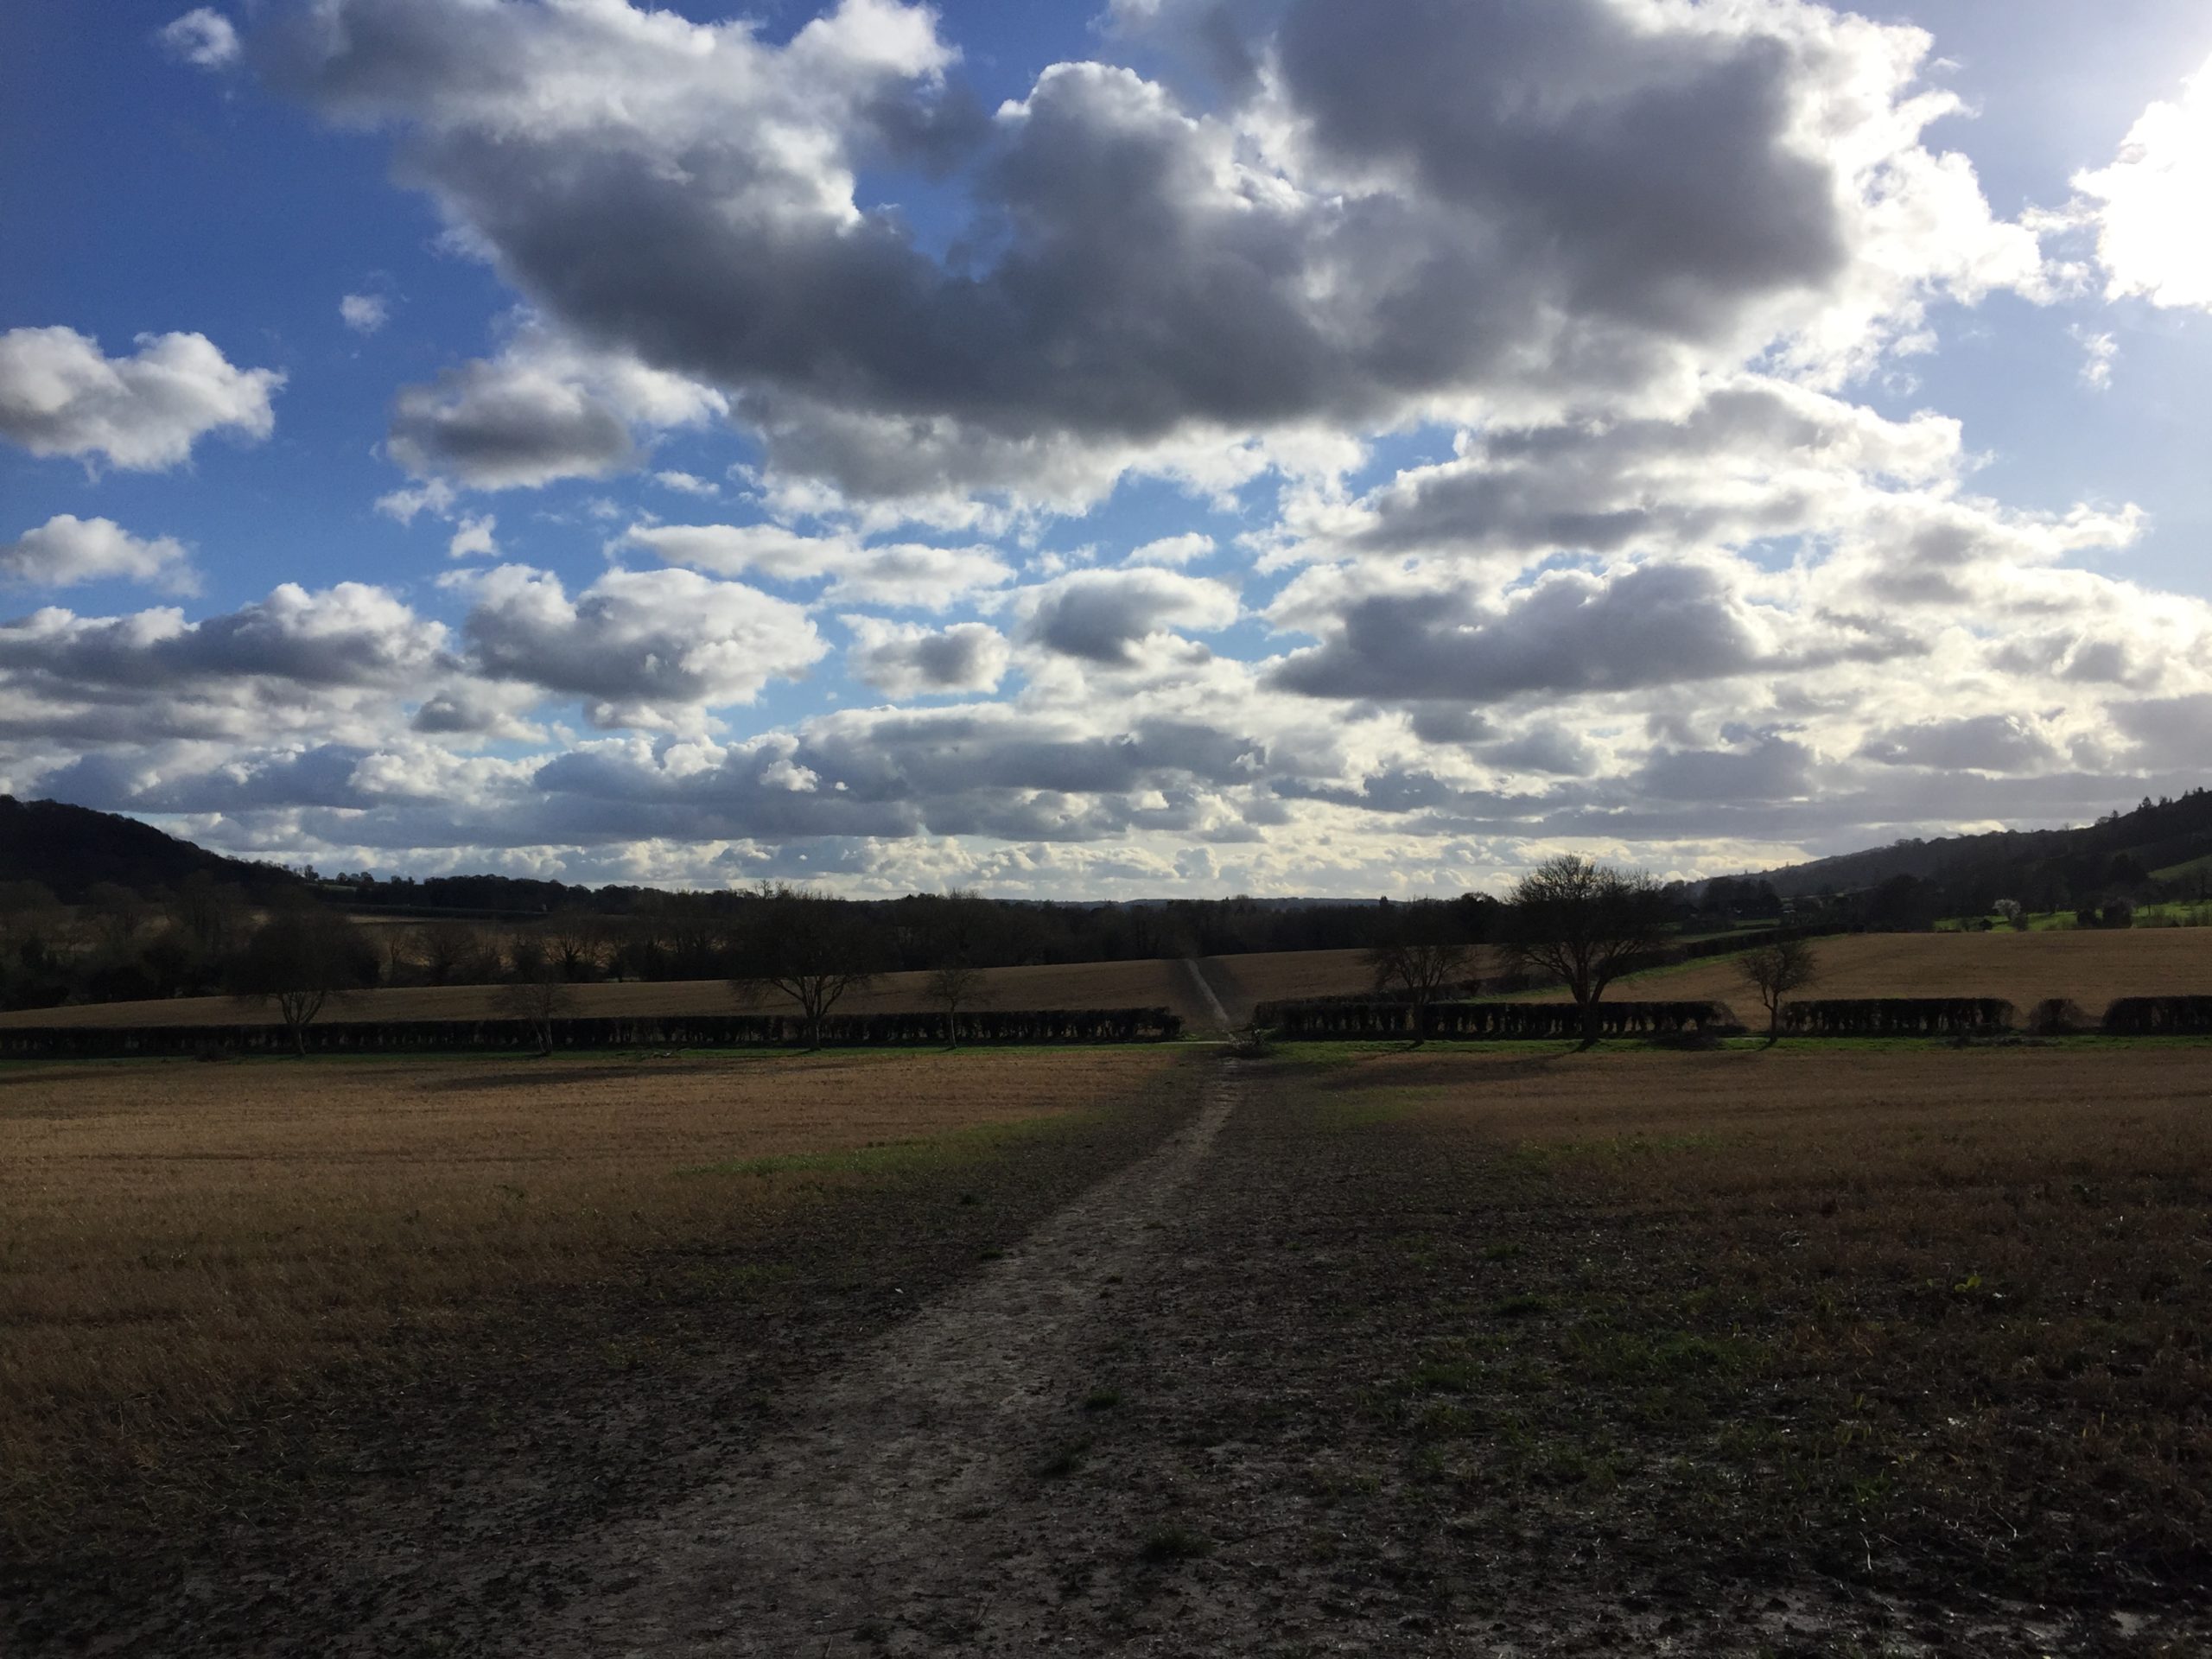 Path through ploughed fields with storm clouds above